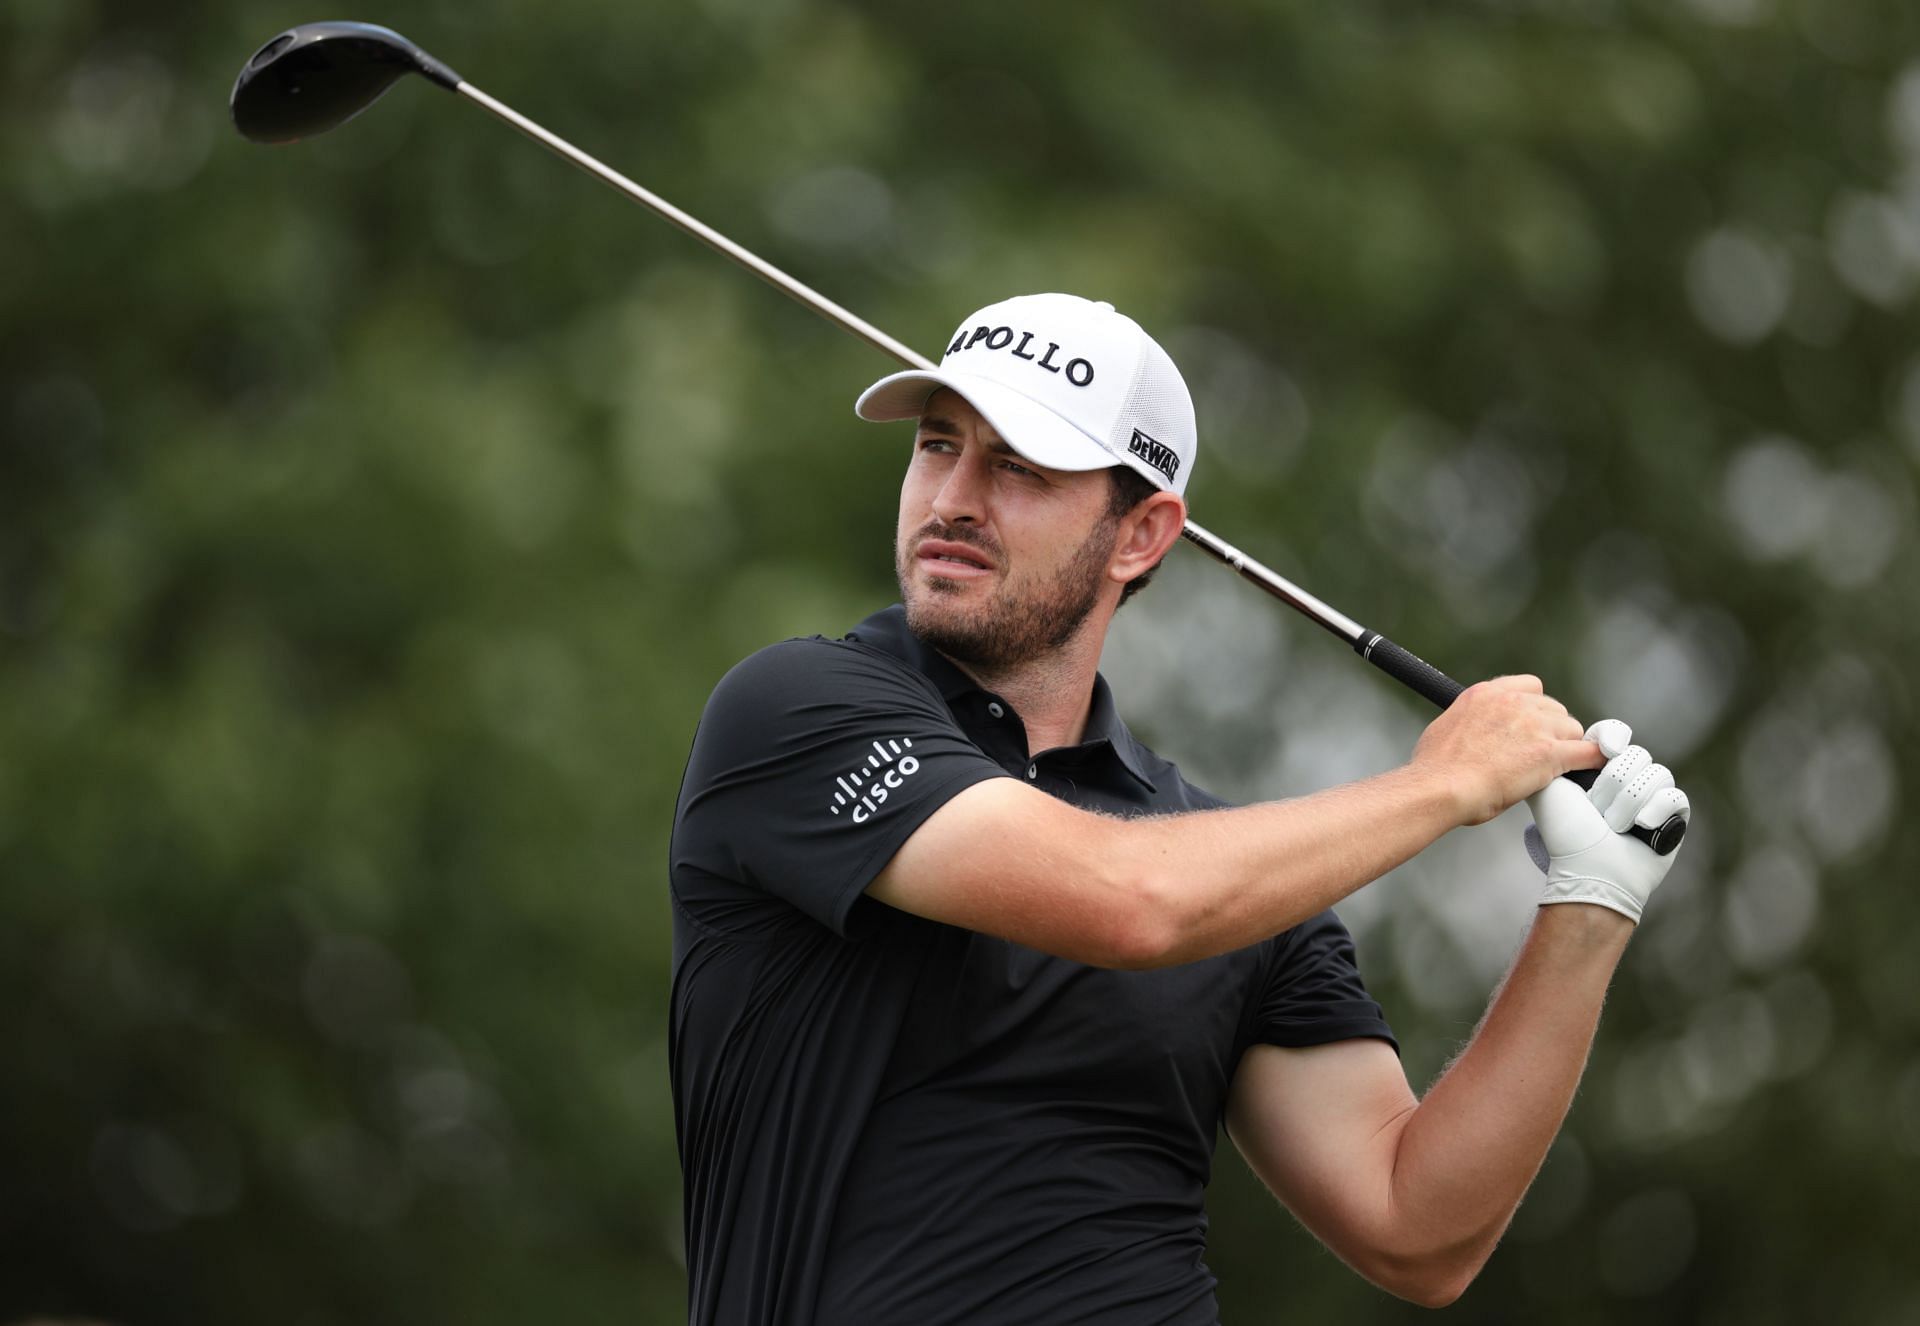 Patrick Cantlay is the betting favorite